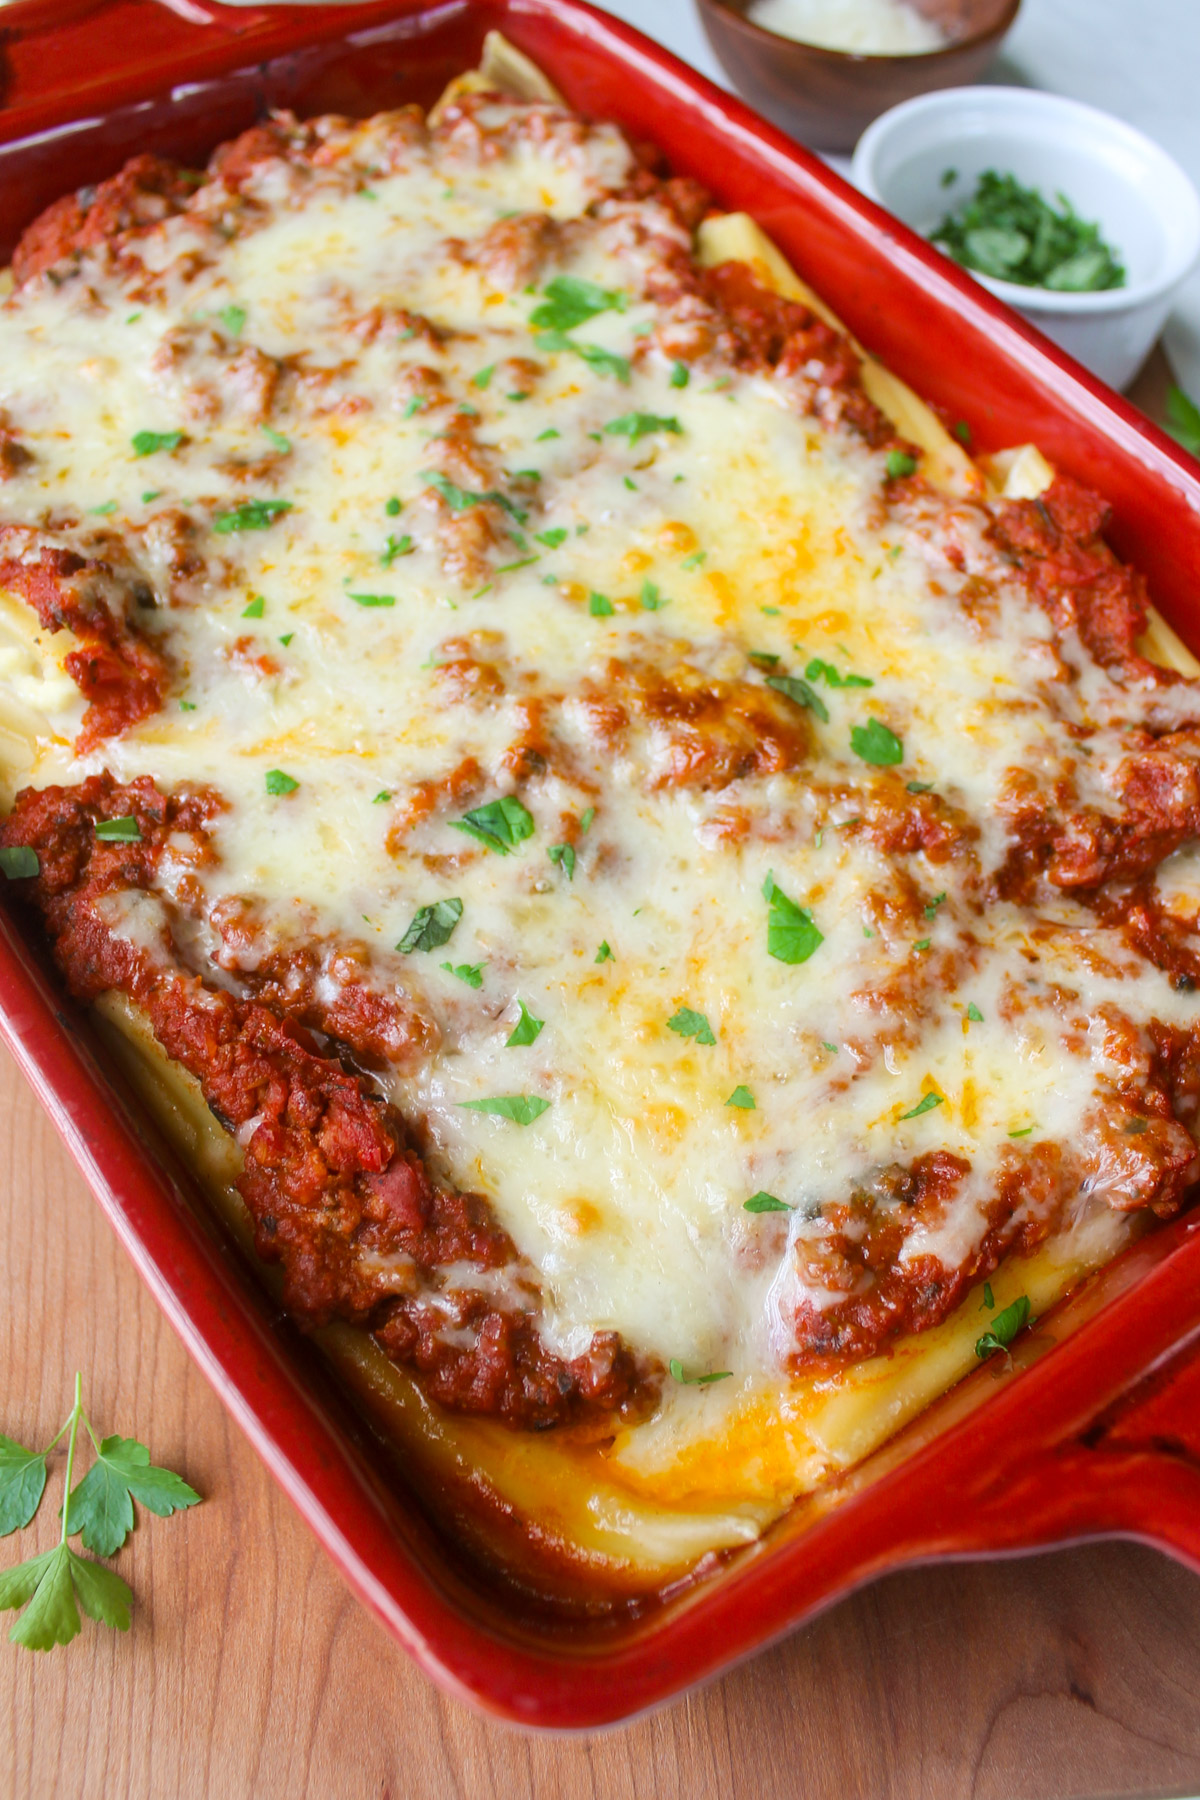 A pan of baked manicotti topped with fresh herbs.